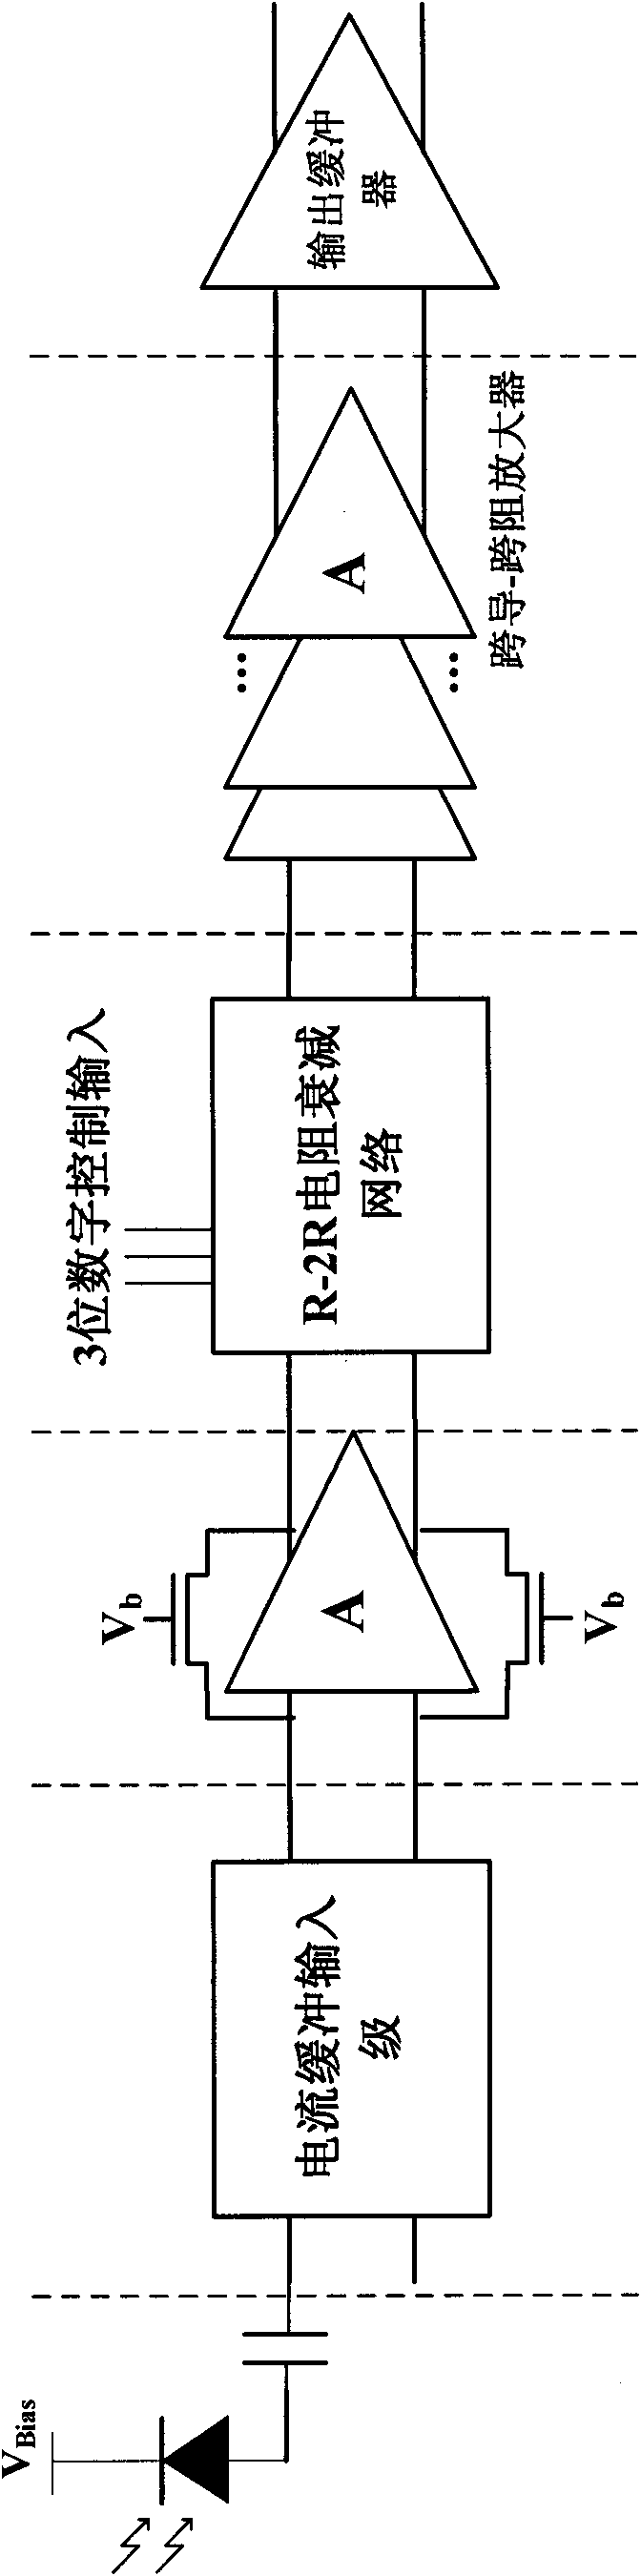 Gain-variable trans-impedance amplifier integrated circuit for pulse laser range finder echo receiver